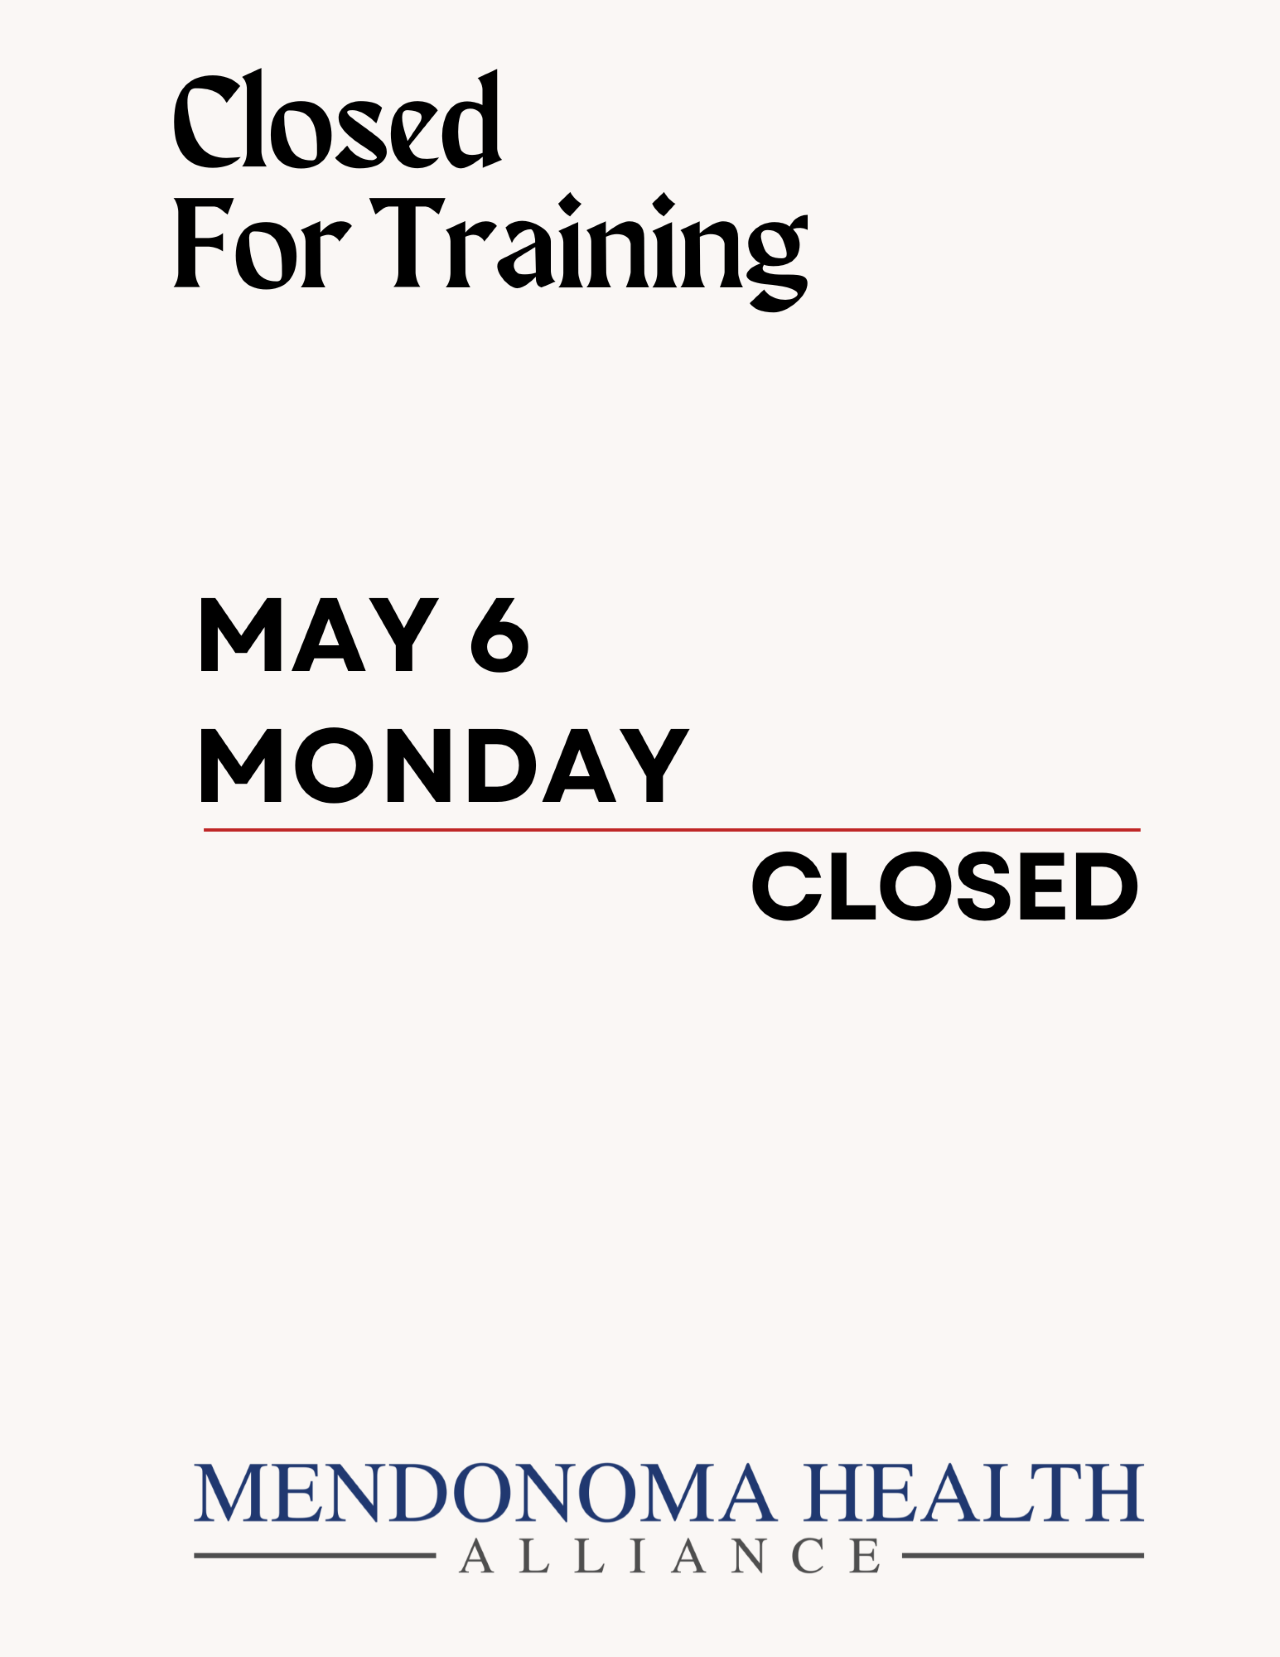 Beige flyer stating office closed for all day training on May 6.